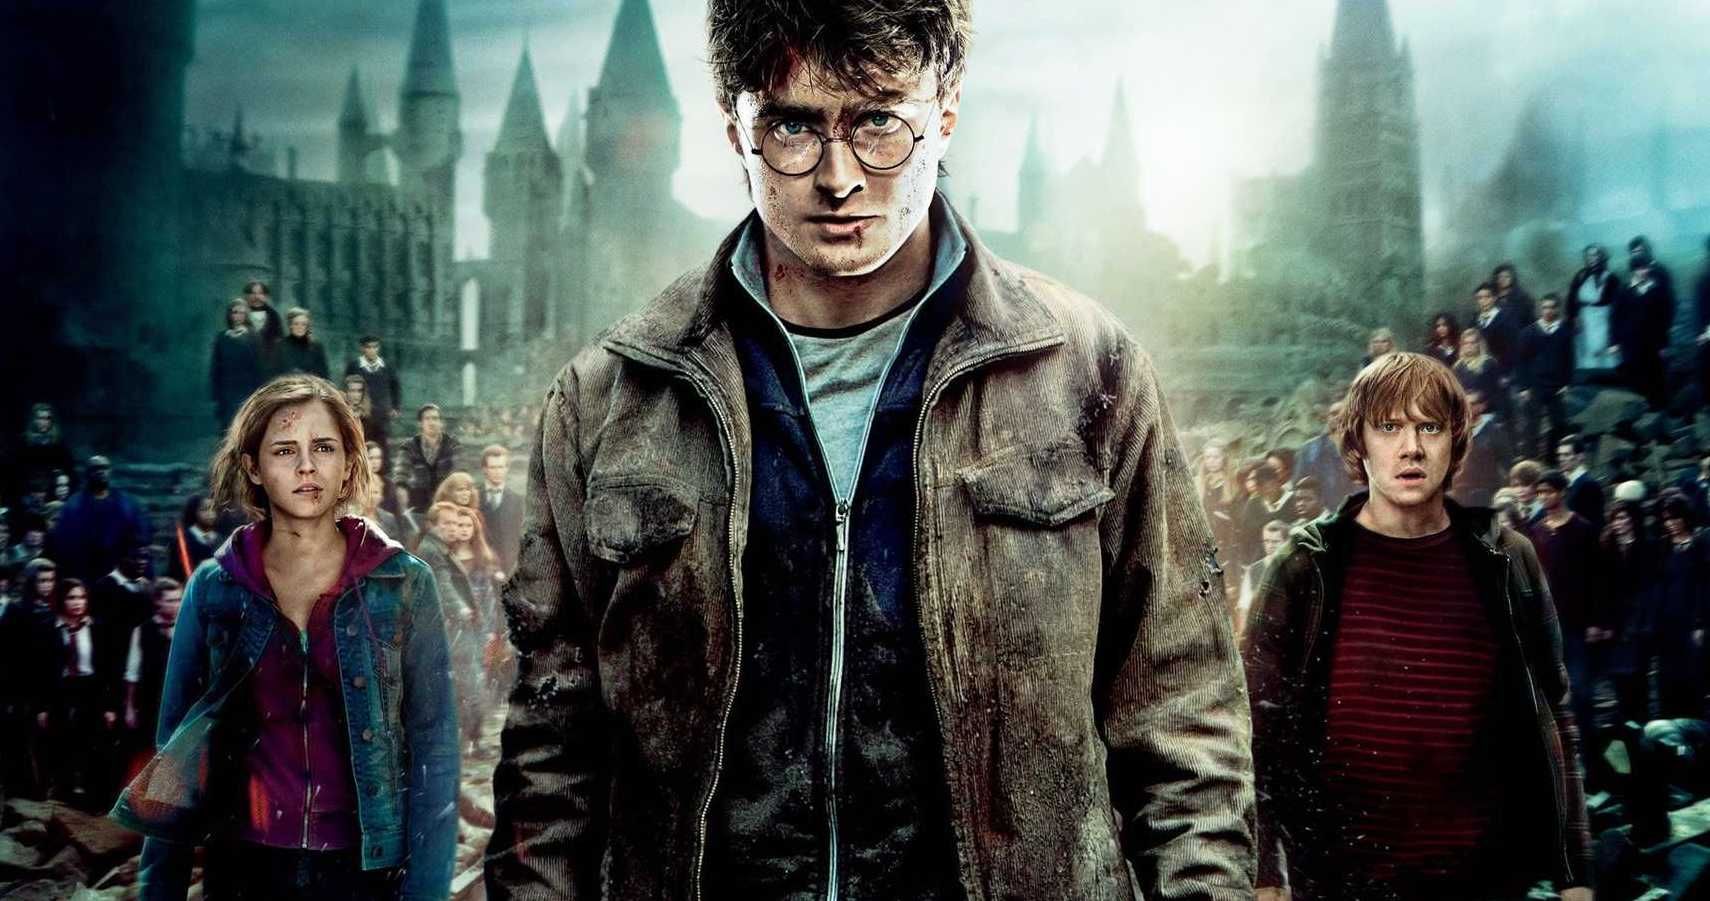 10 Questions About Harry Potter You Were Afraid To Ask